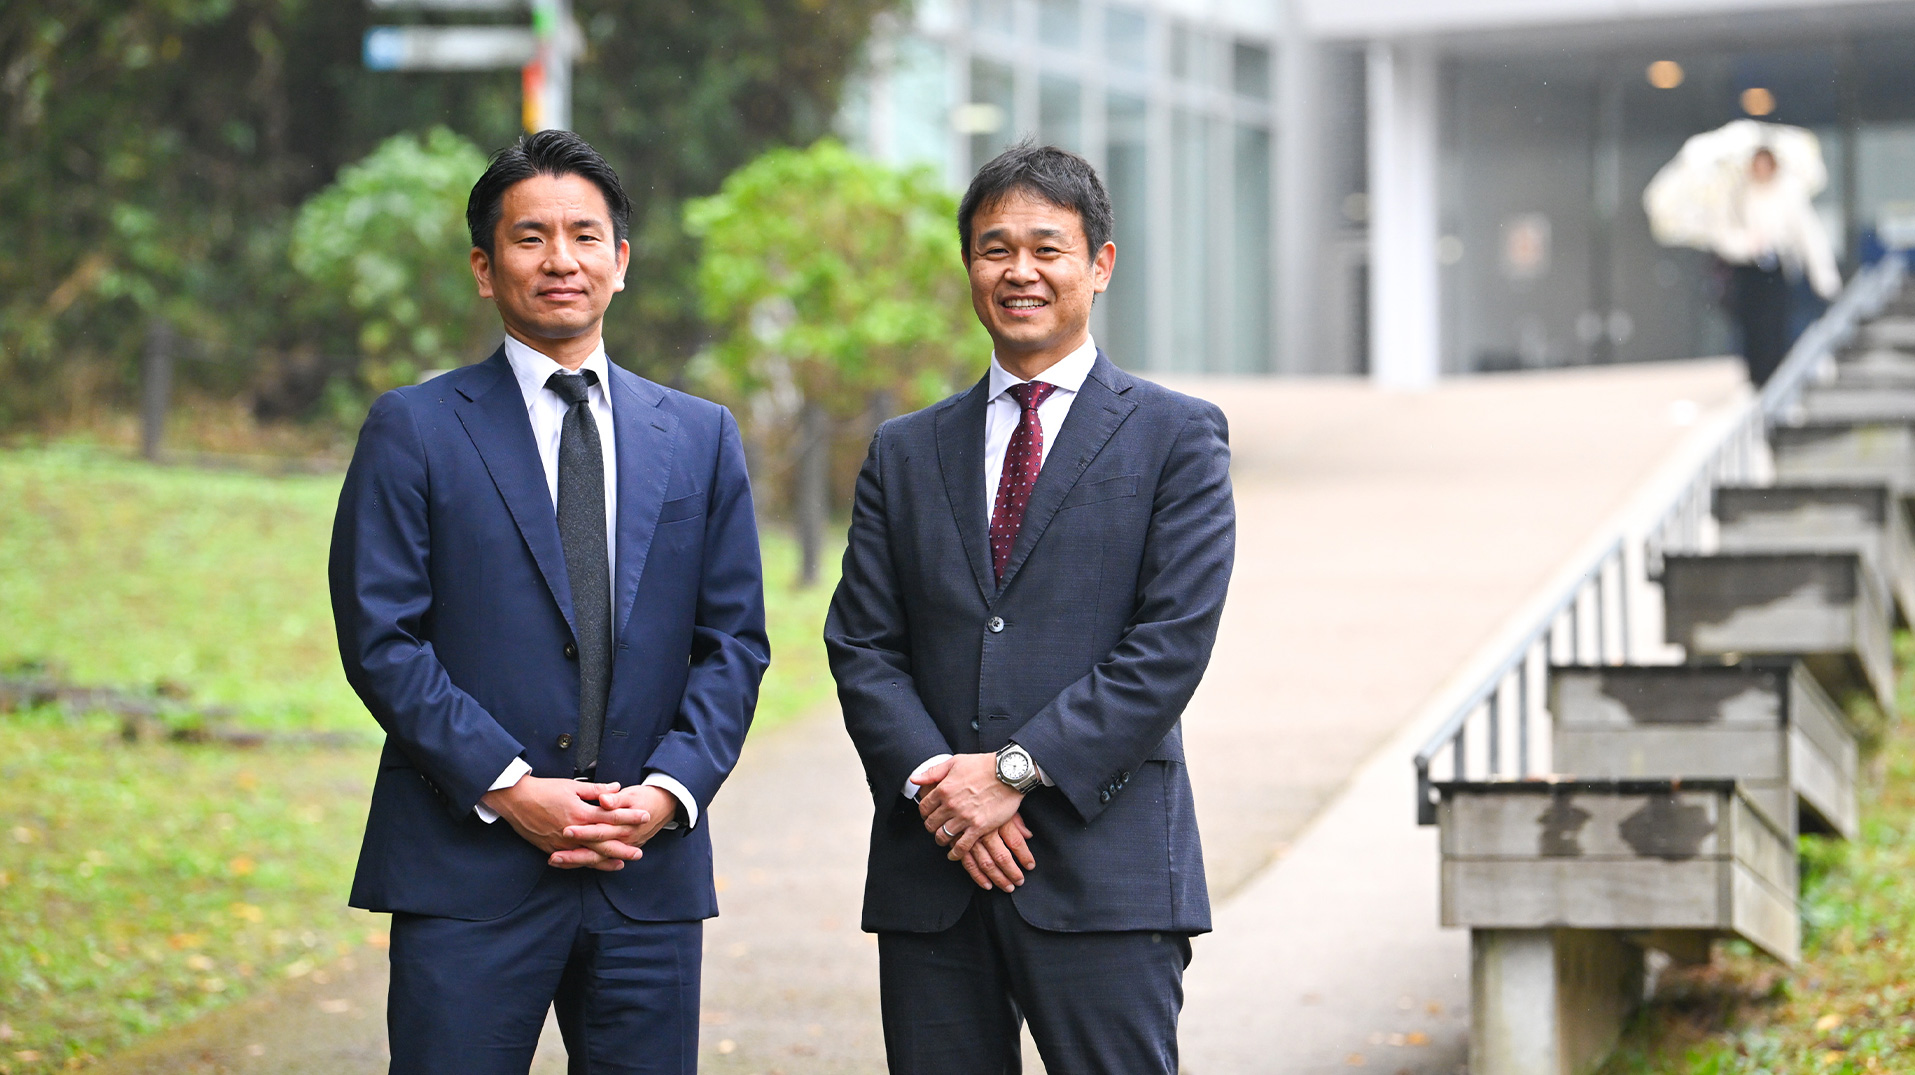 [Interview] Deep tech venture from Tokyo Tech opens a hole in the 100-year-old ammonia industry